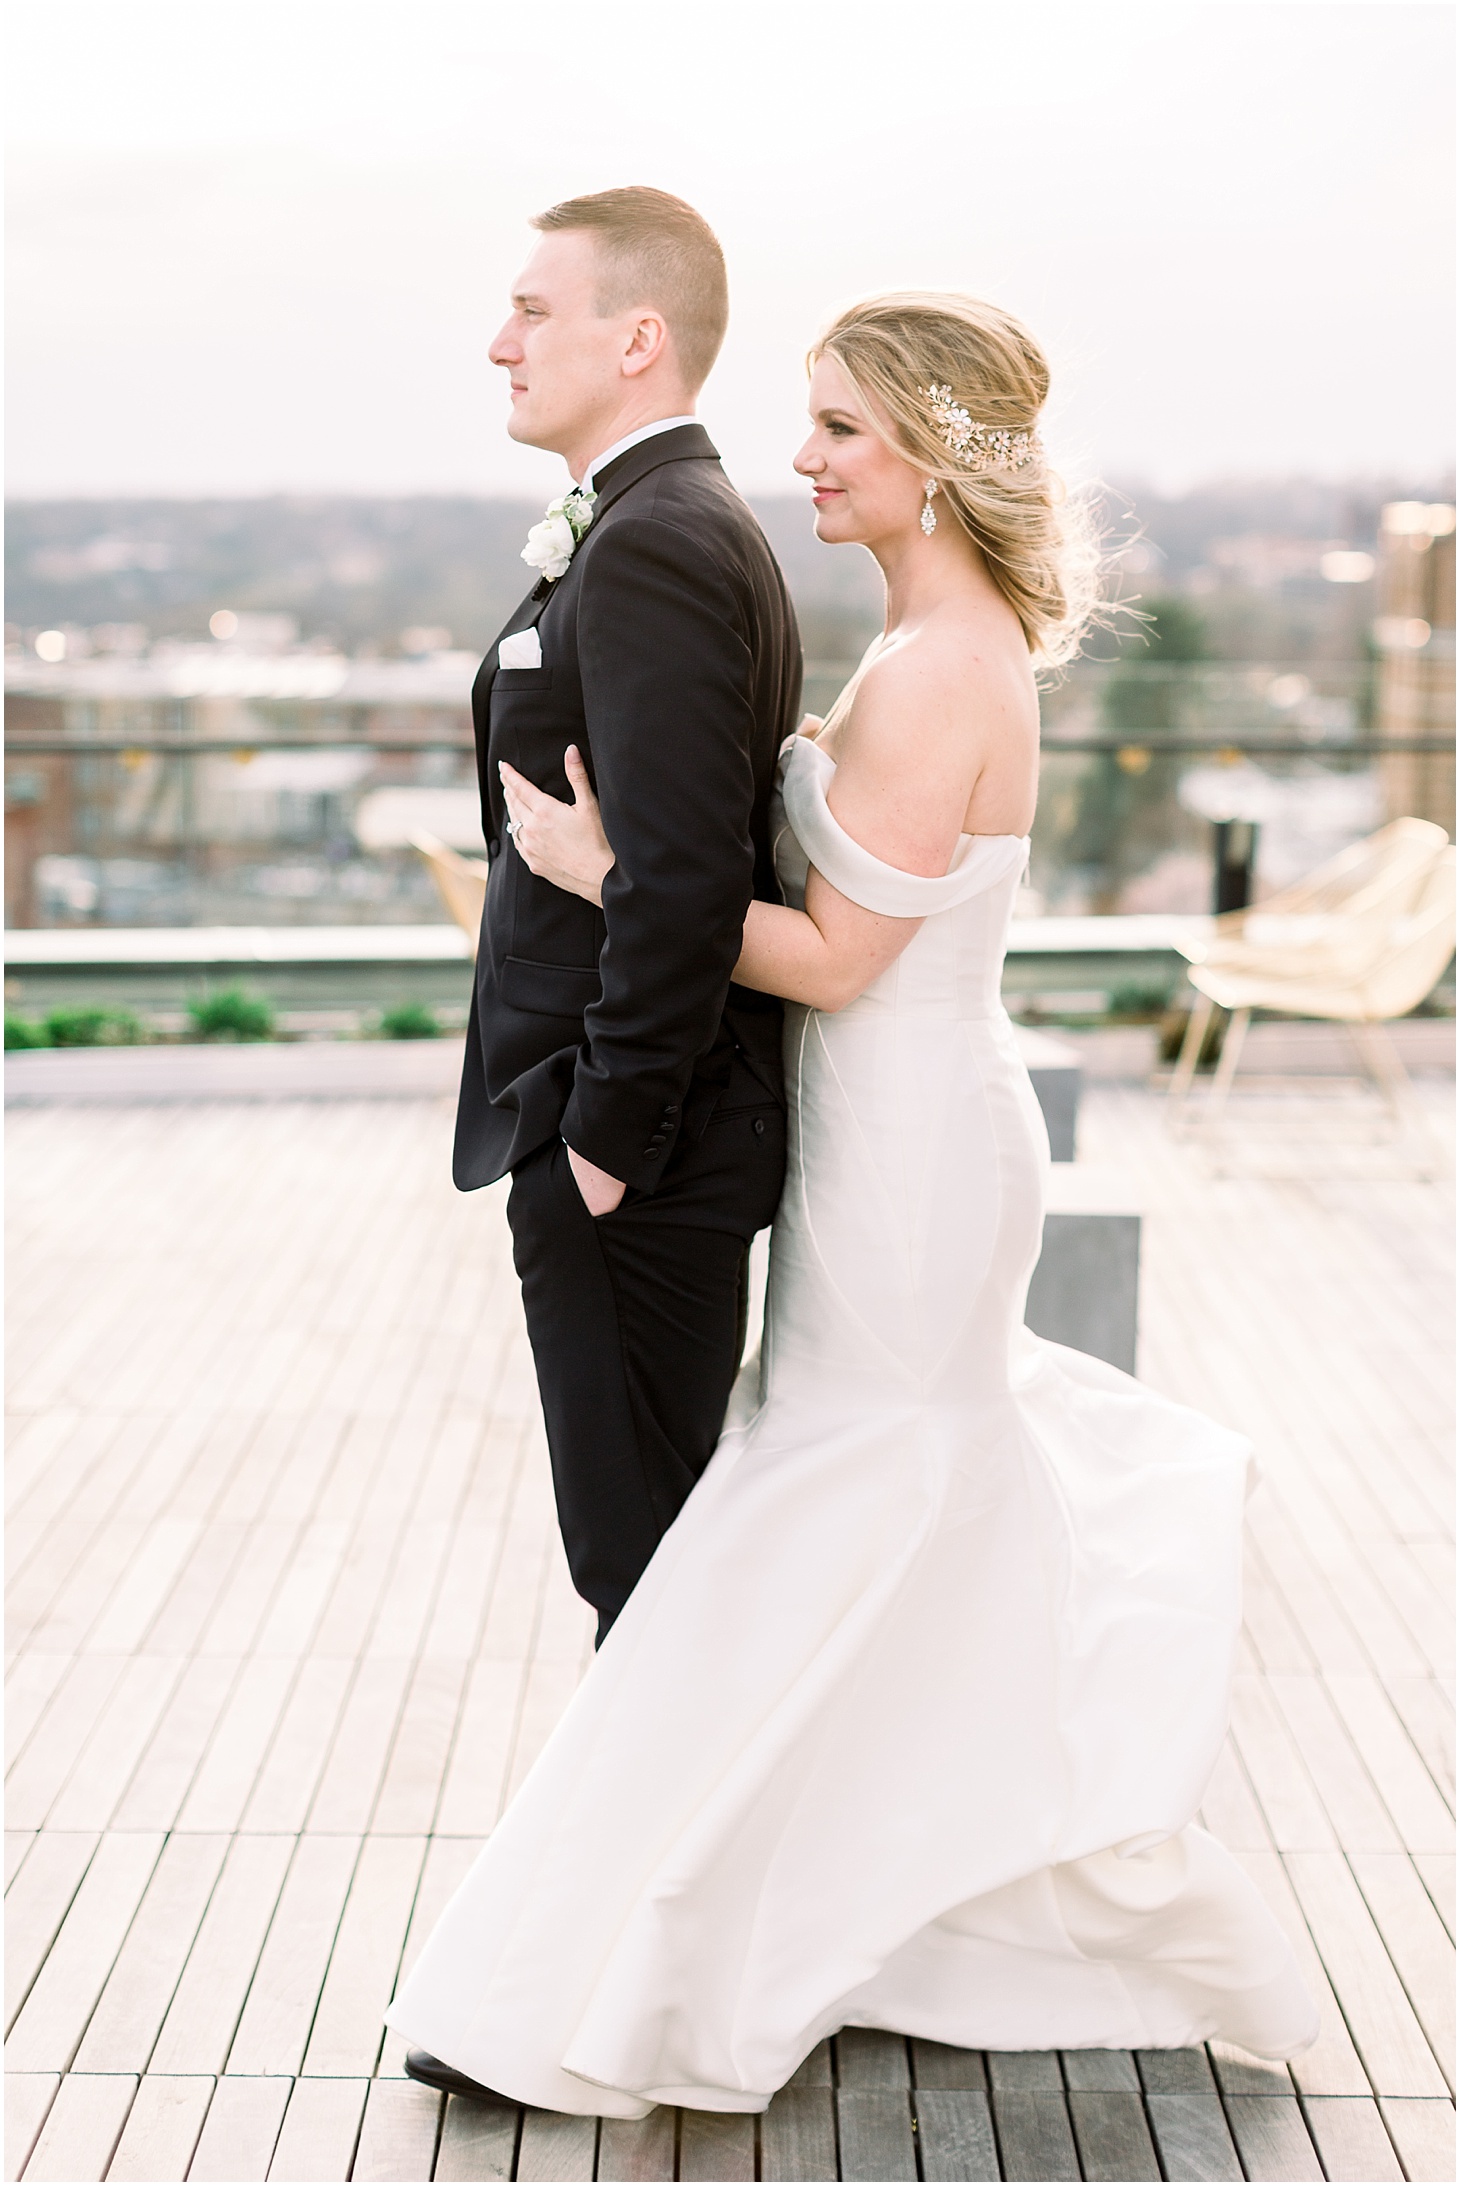 Sunset Wedding Portraits at The LINE Hotel DC, Modern Spring Wedding at The LINE Hotel DC, Wedding Ceremony at National United Methodist Church, Sarah Bradshaw Photography, DC Wedding Photographer